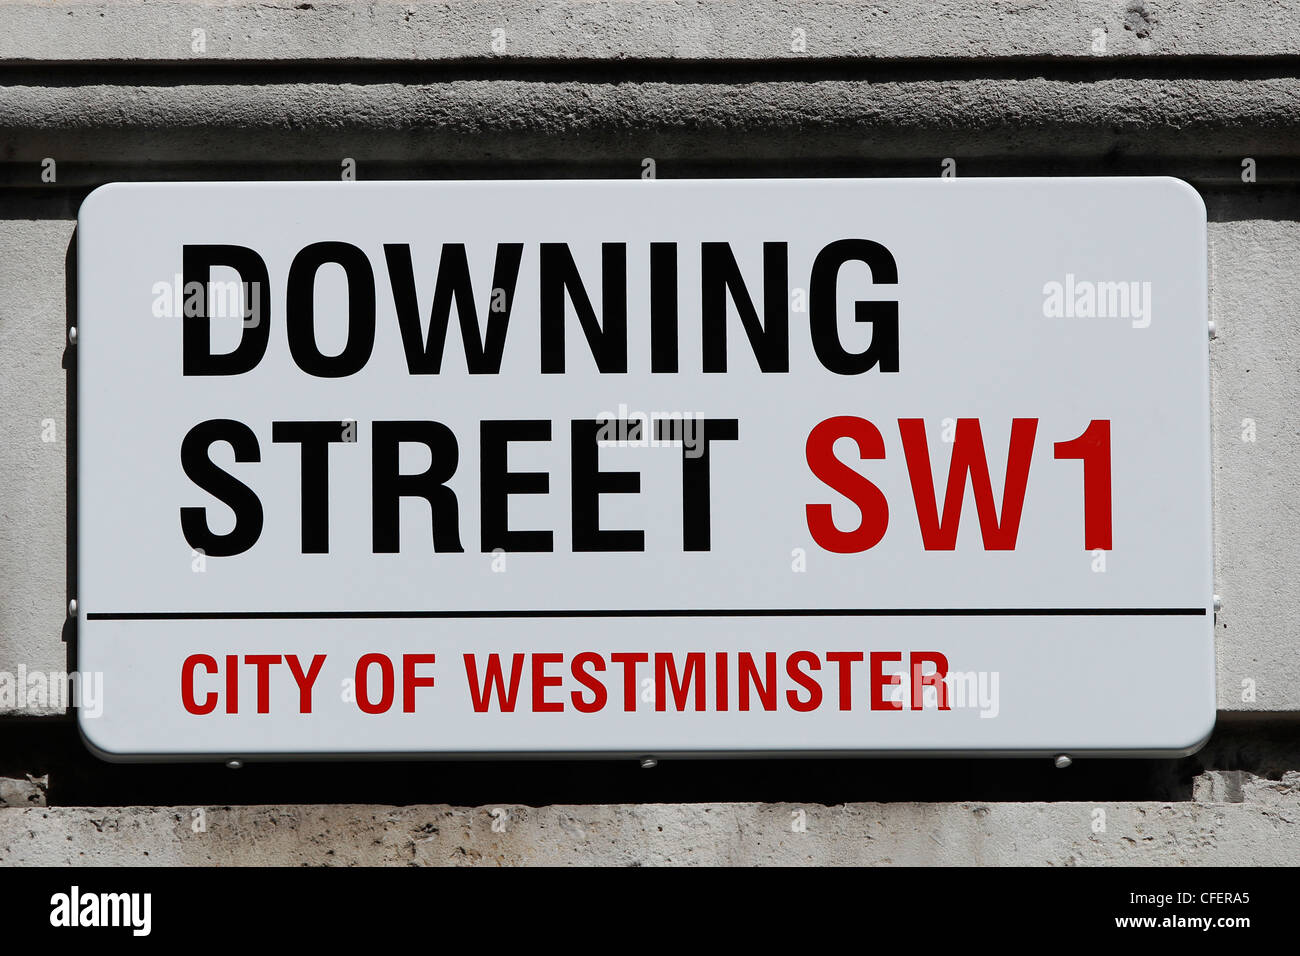 Road sign for Downing Street in postcode SW1, City of Westminster, London Stock Photo